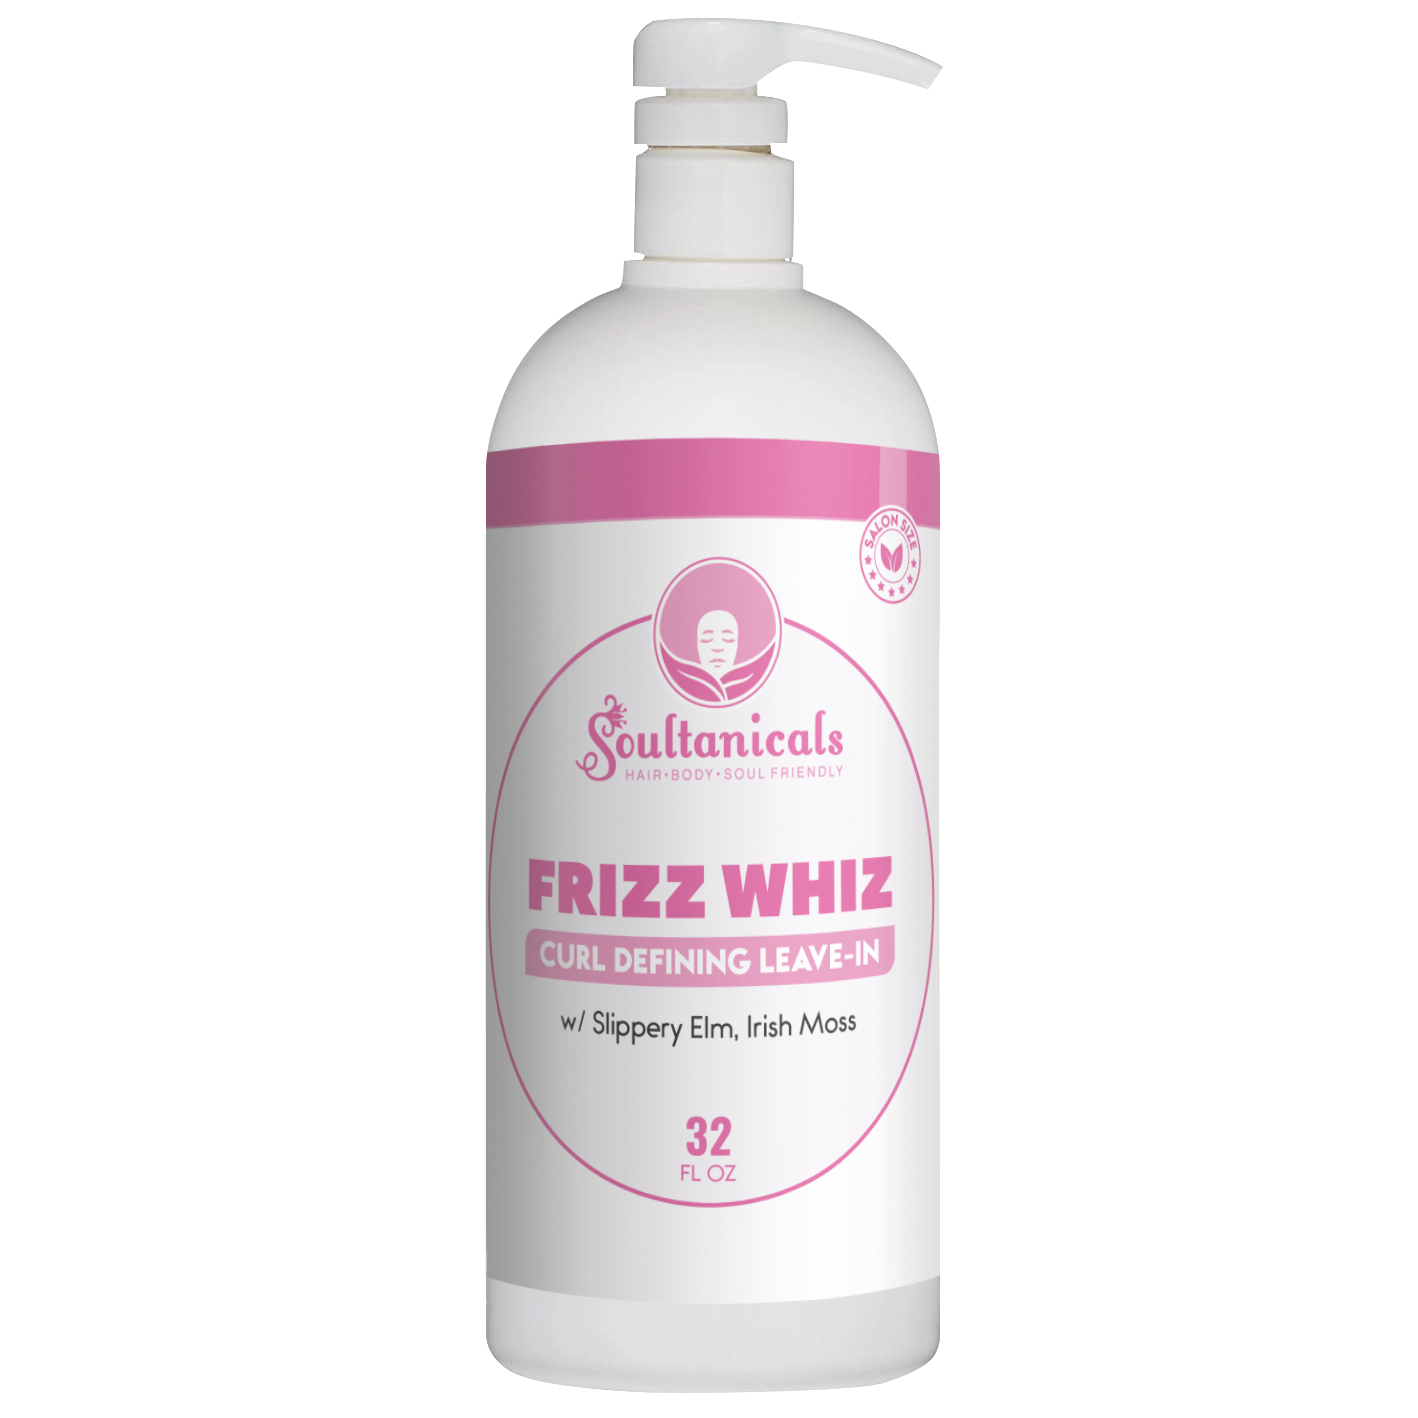 Frizz Whiz, Curl Defining Leave-In 32 oz- Ships By 4/26